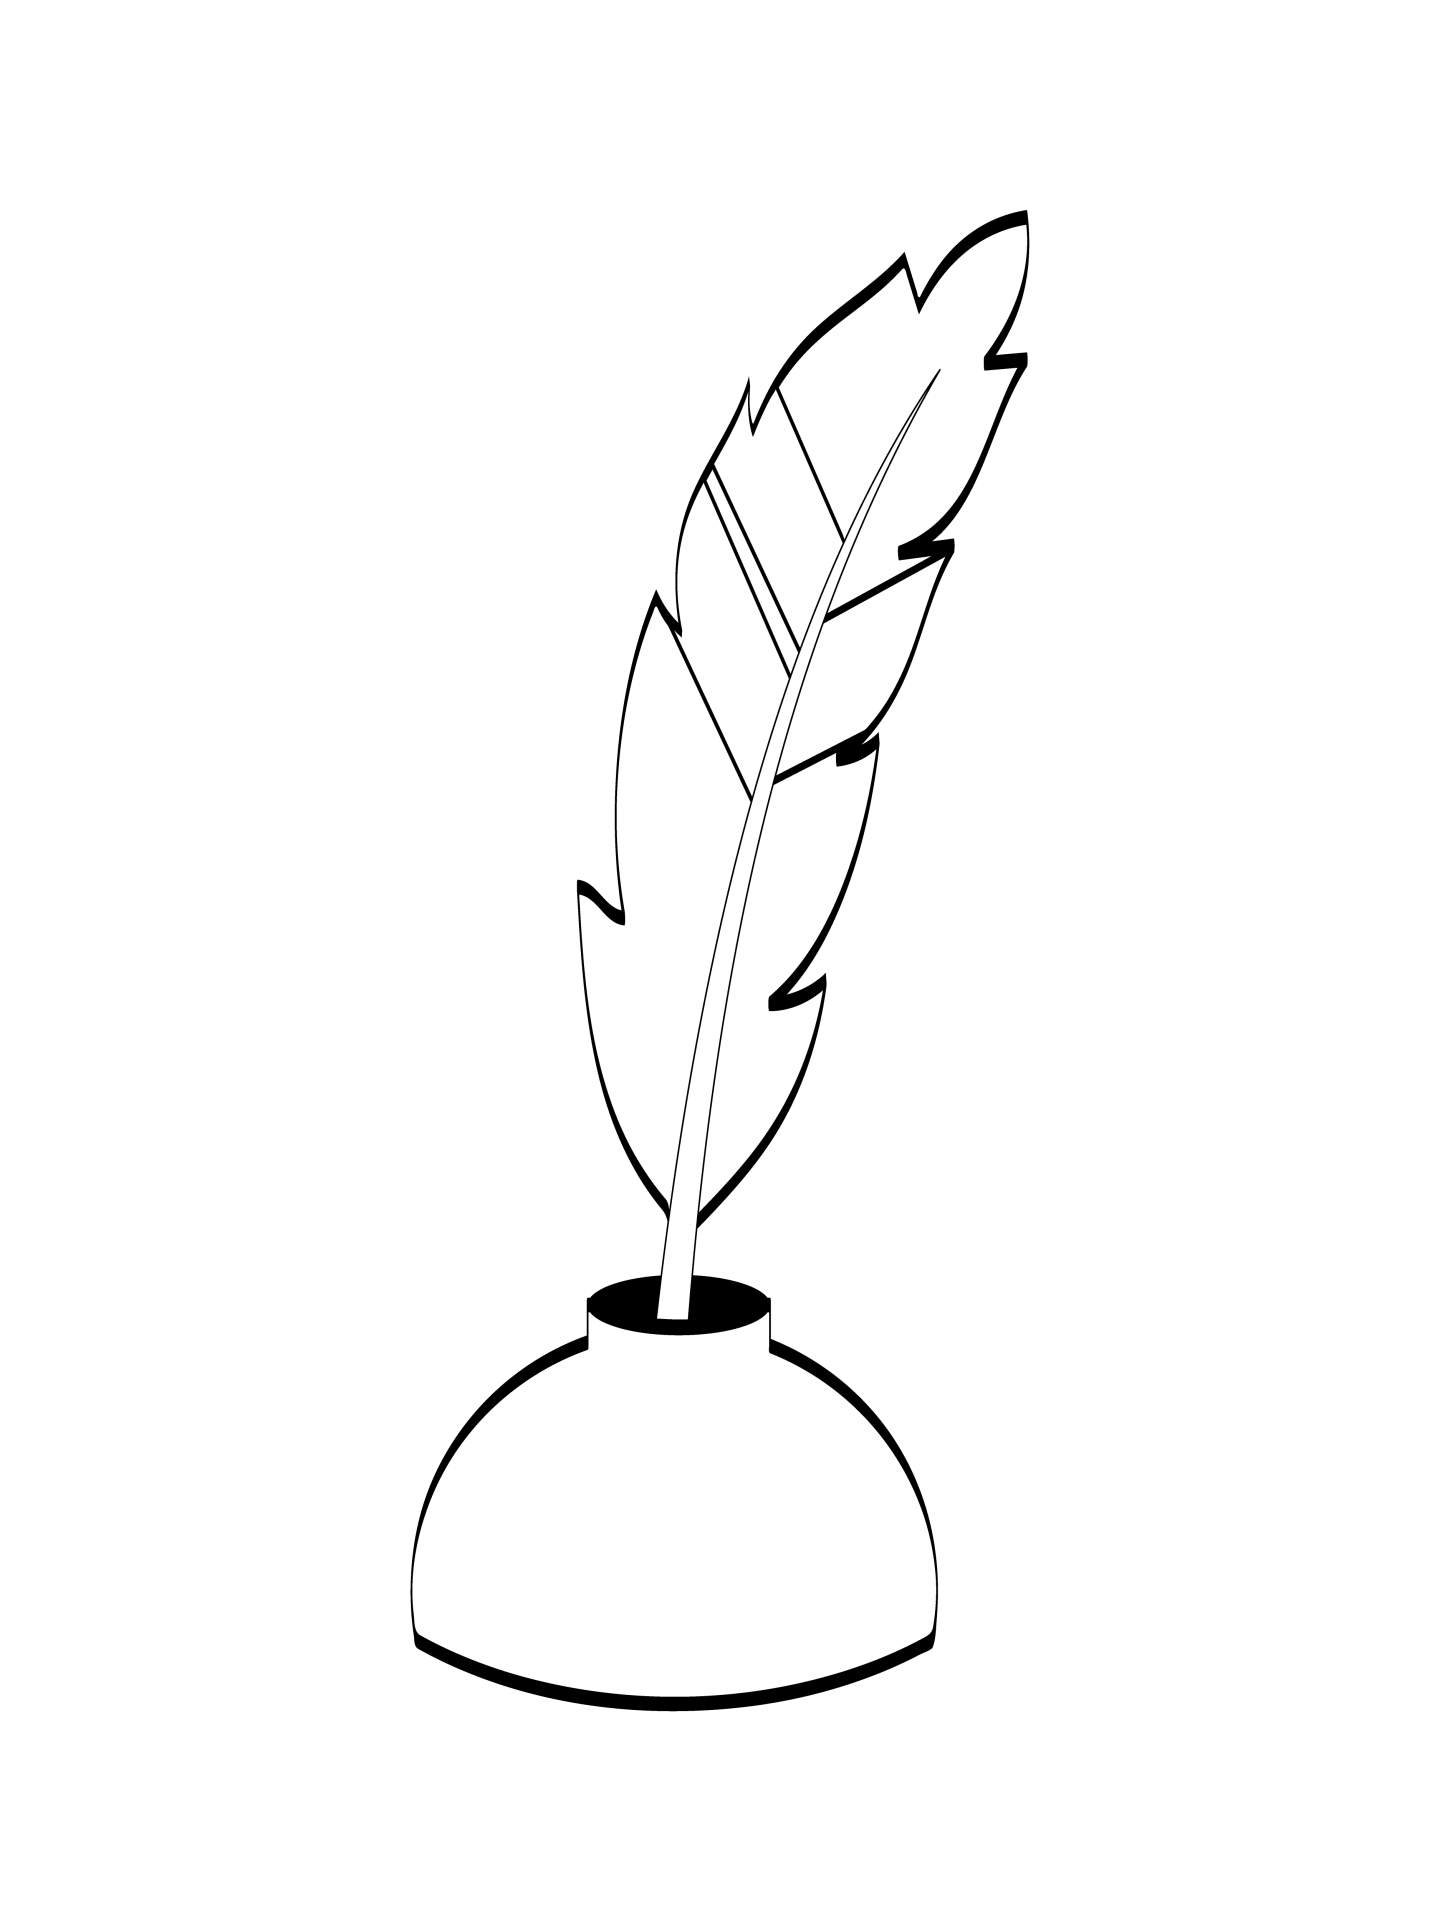 Outline black and white clipart drawing of vintage feather quill in inkpot on transparent background